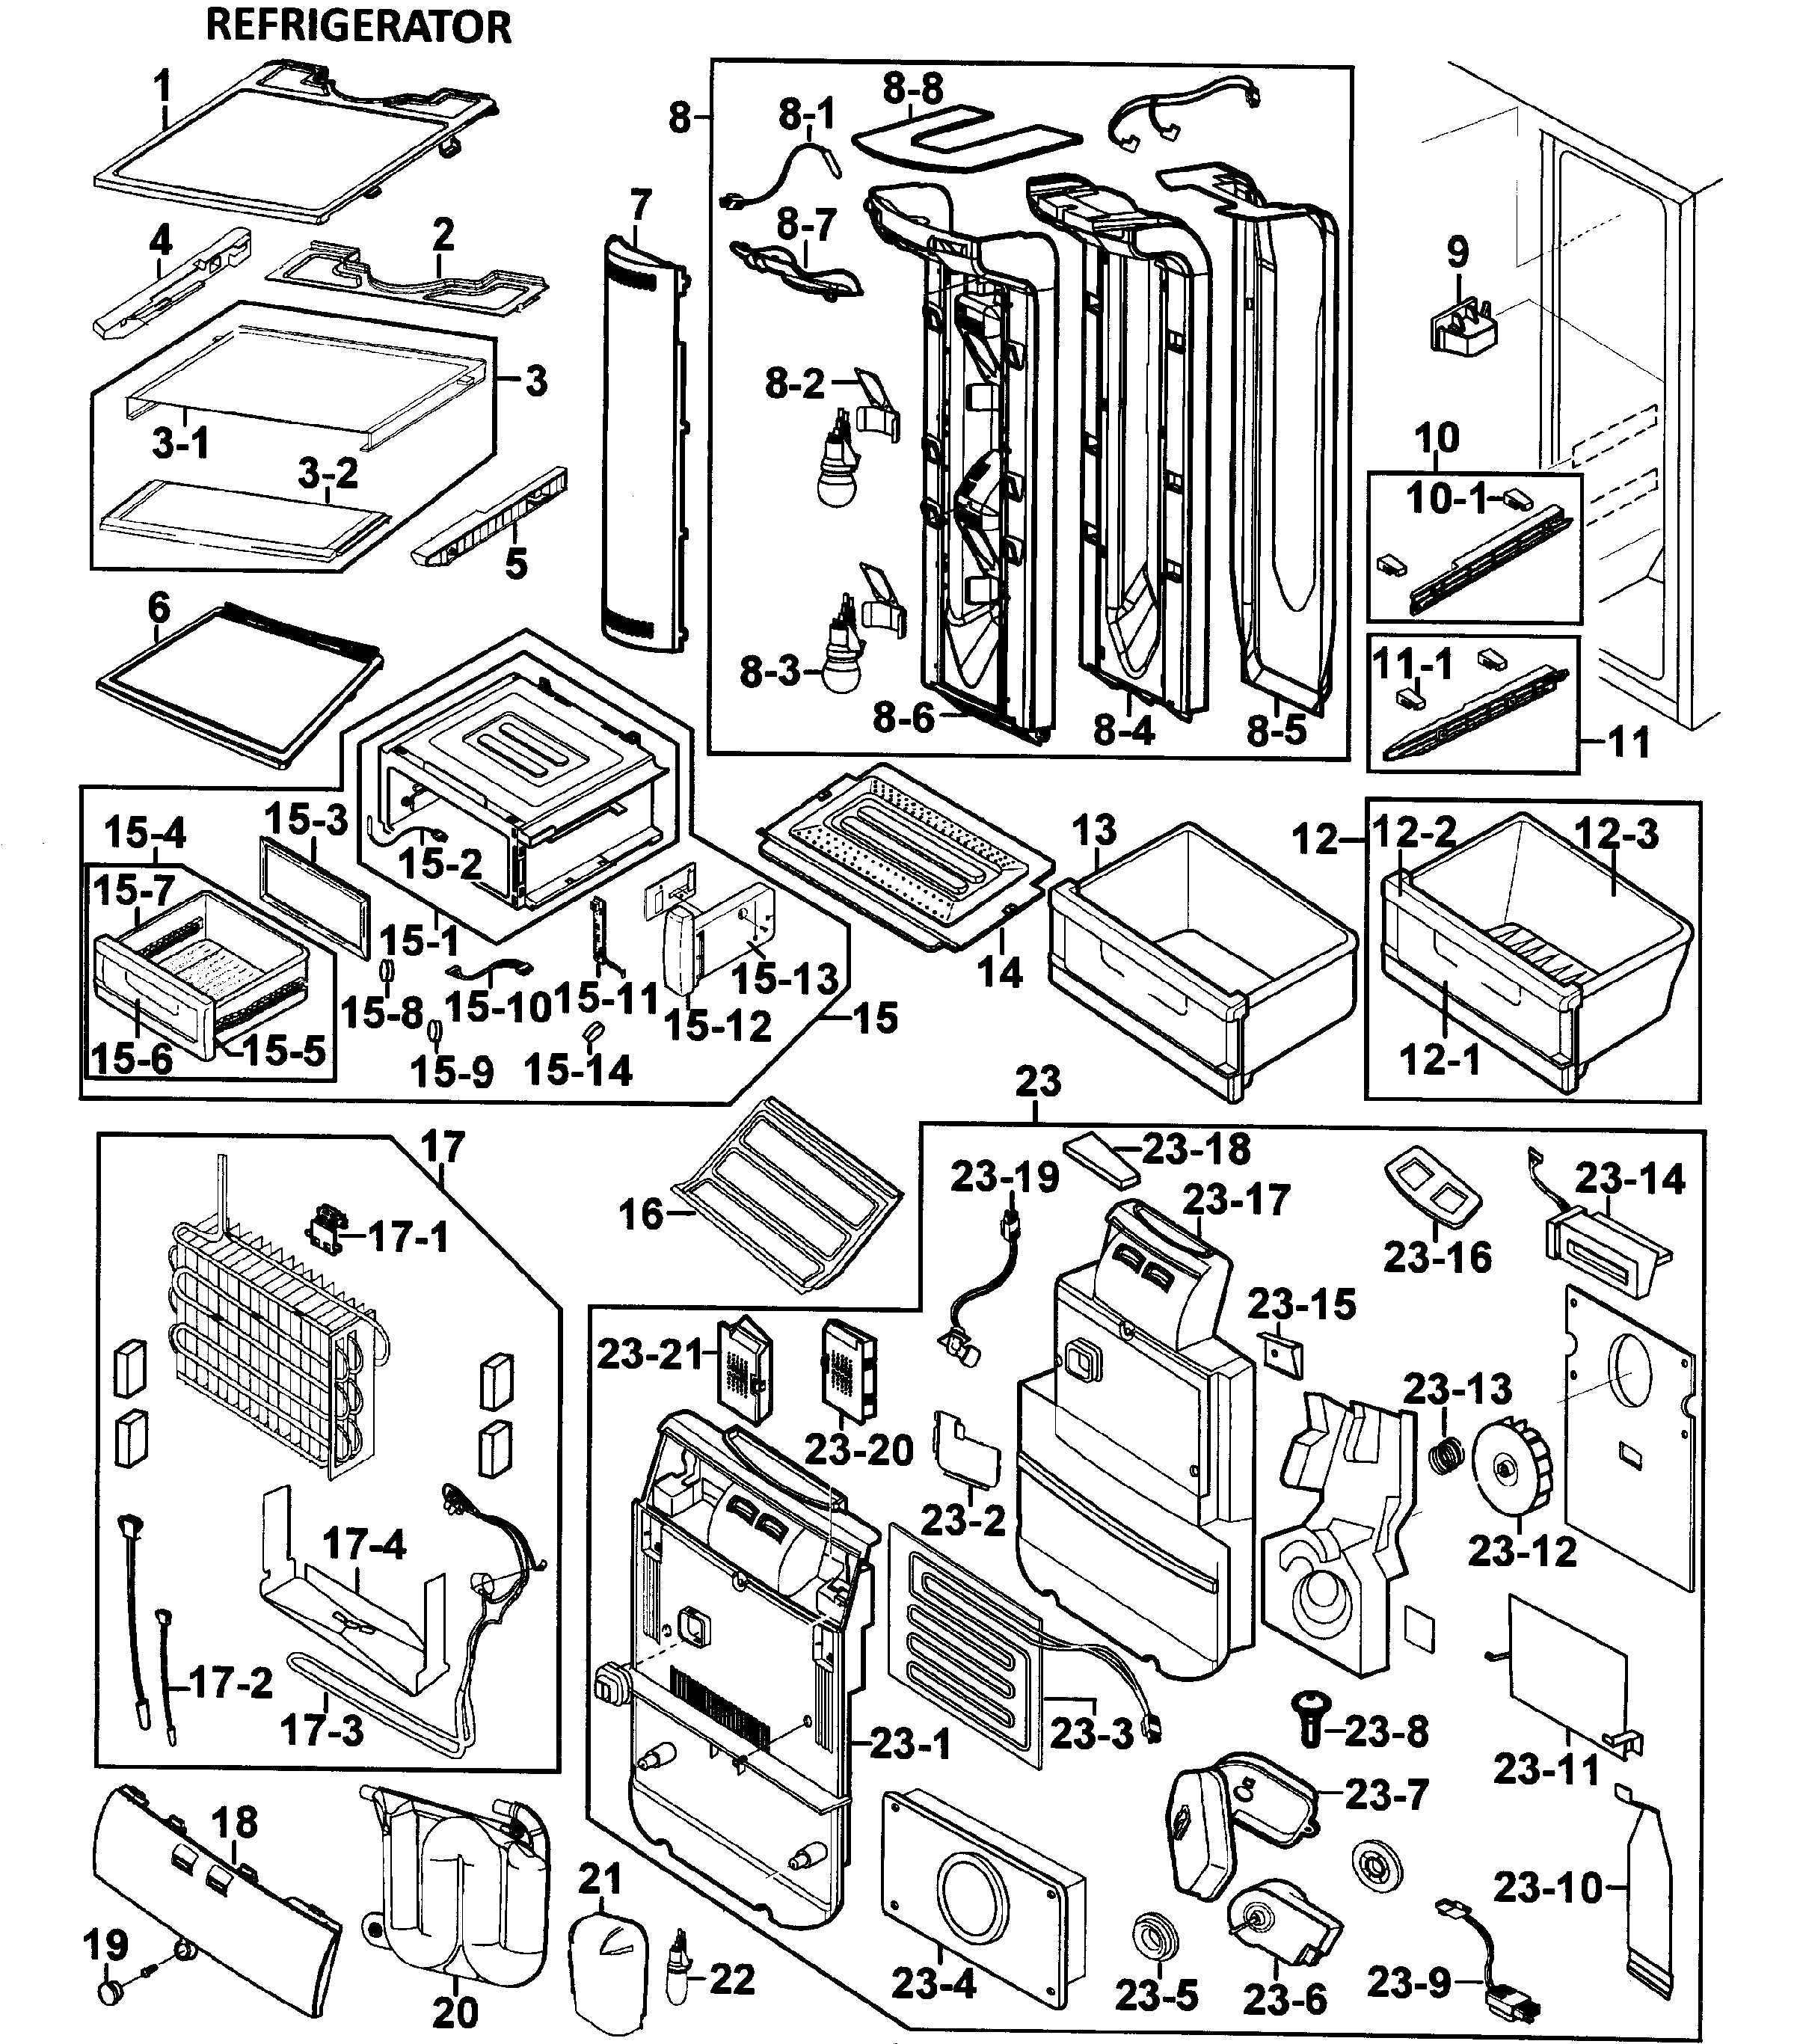 rs277acrs wiring diagram